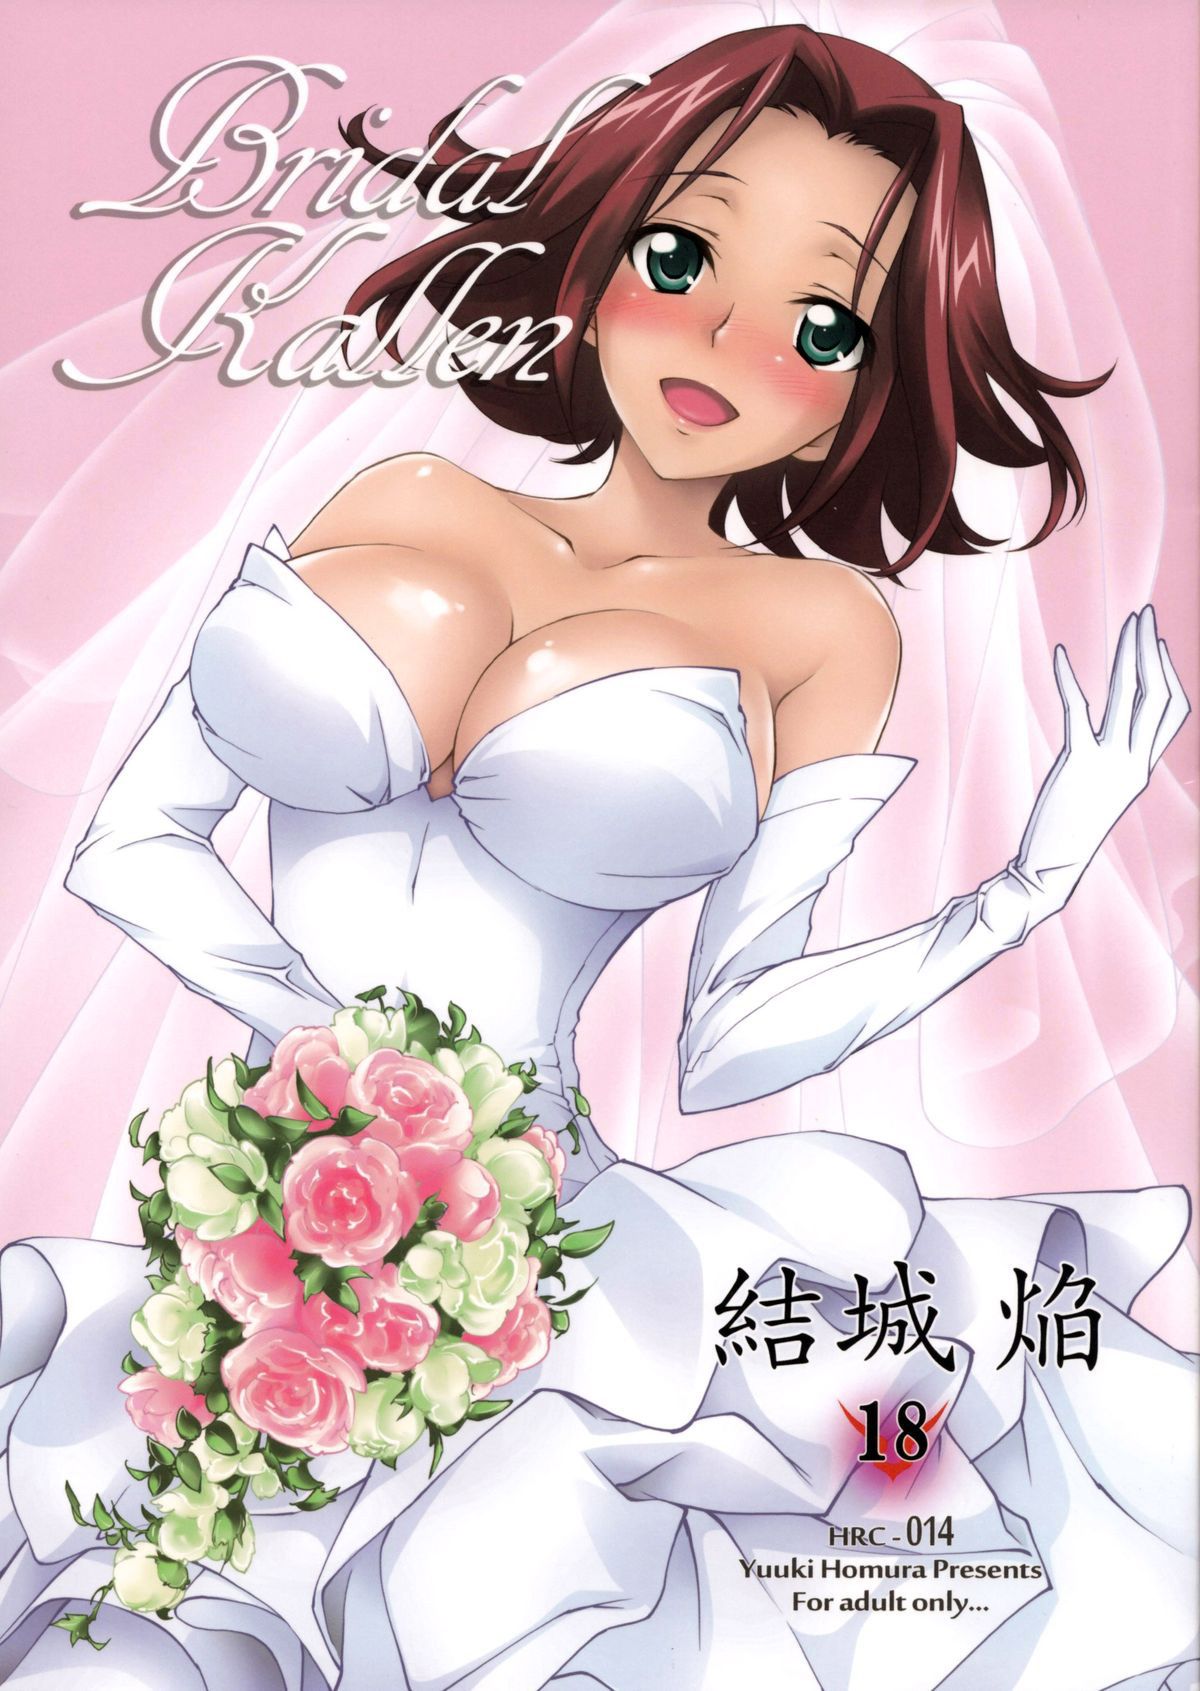 Secondary images of the girl wearing a wedding dress and 4 50 sheets [erotic and non-erotic] 39